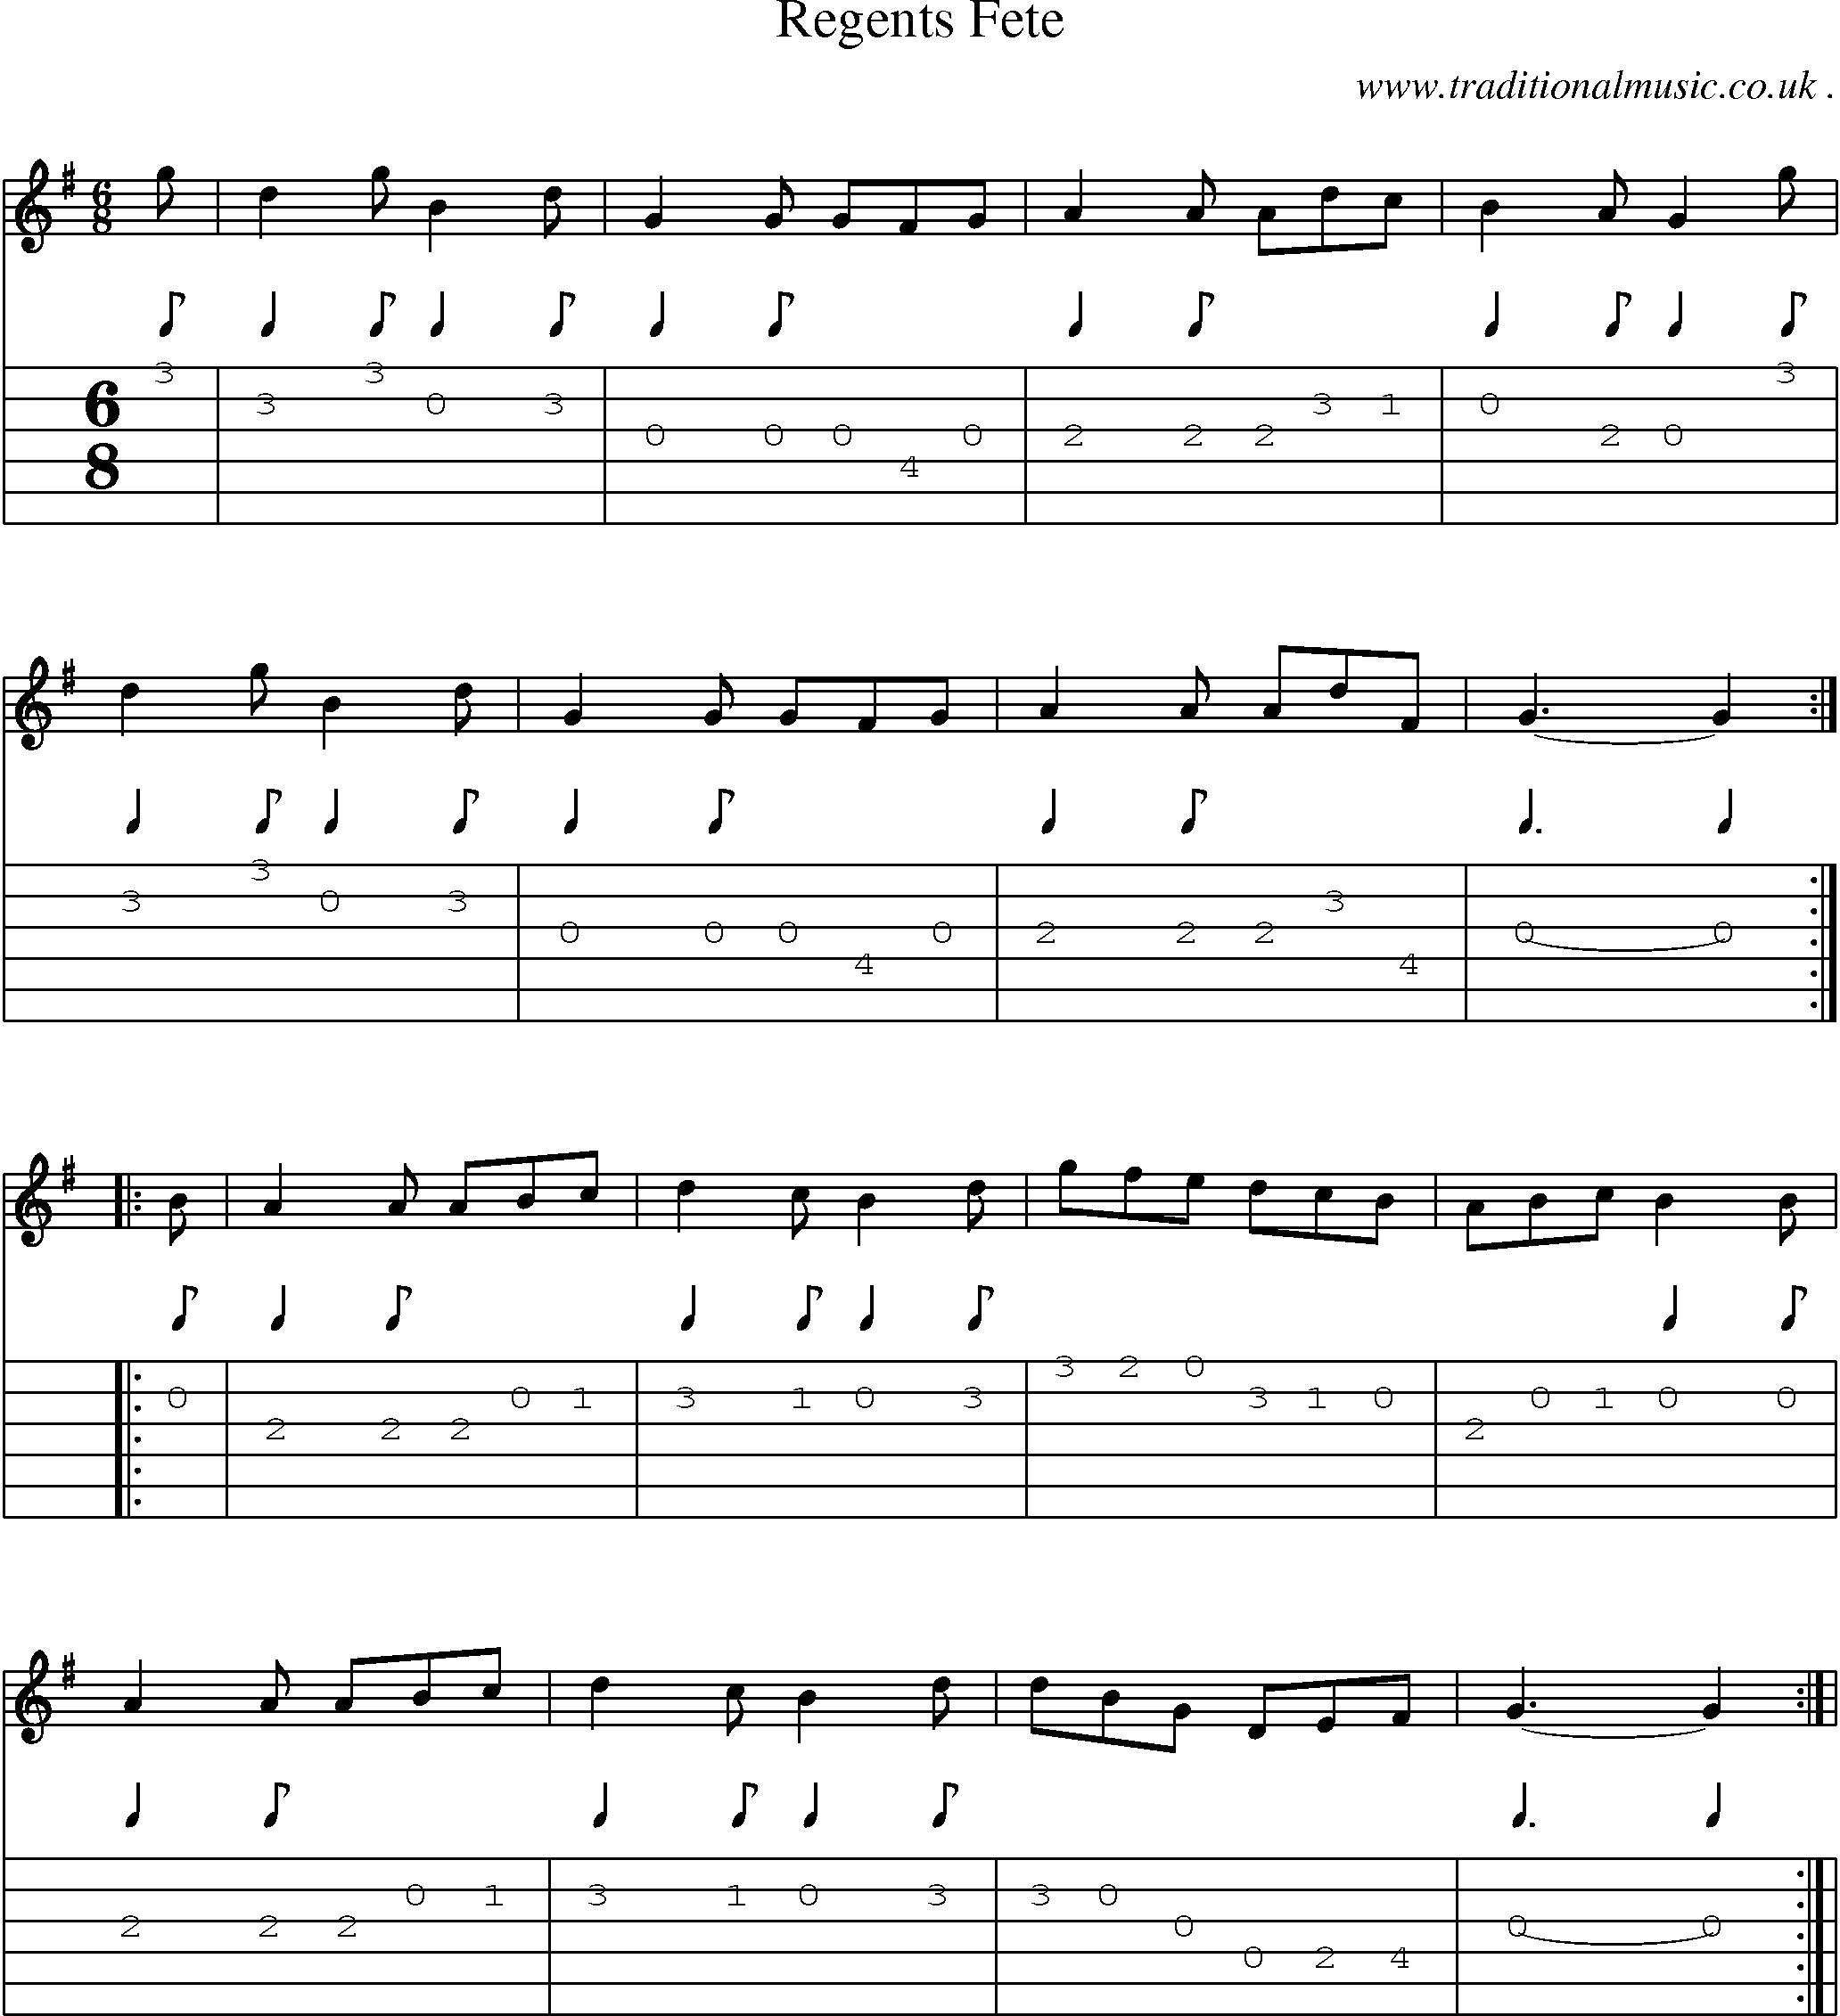 Sheet-Music and Guitar Tabs for Regents Fete